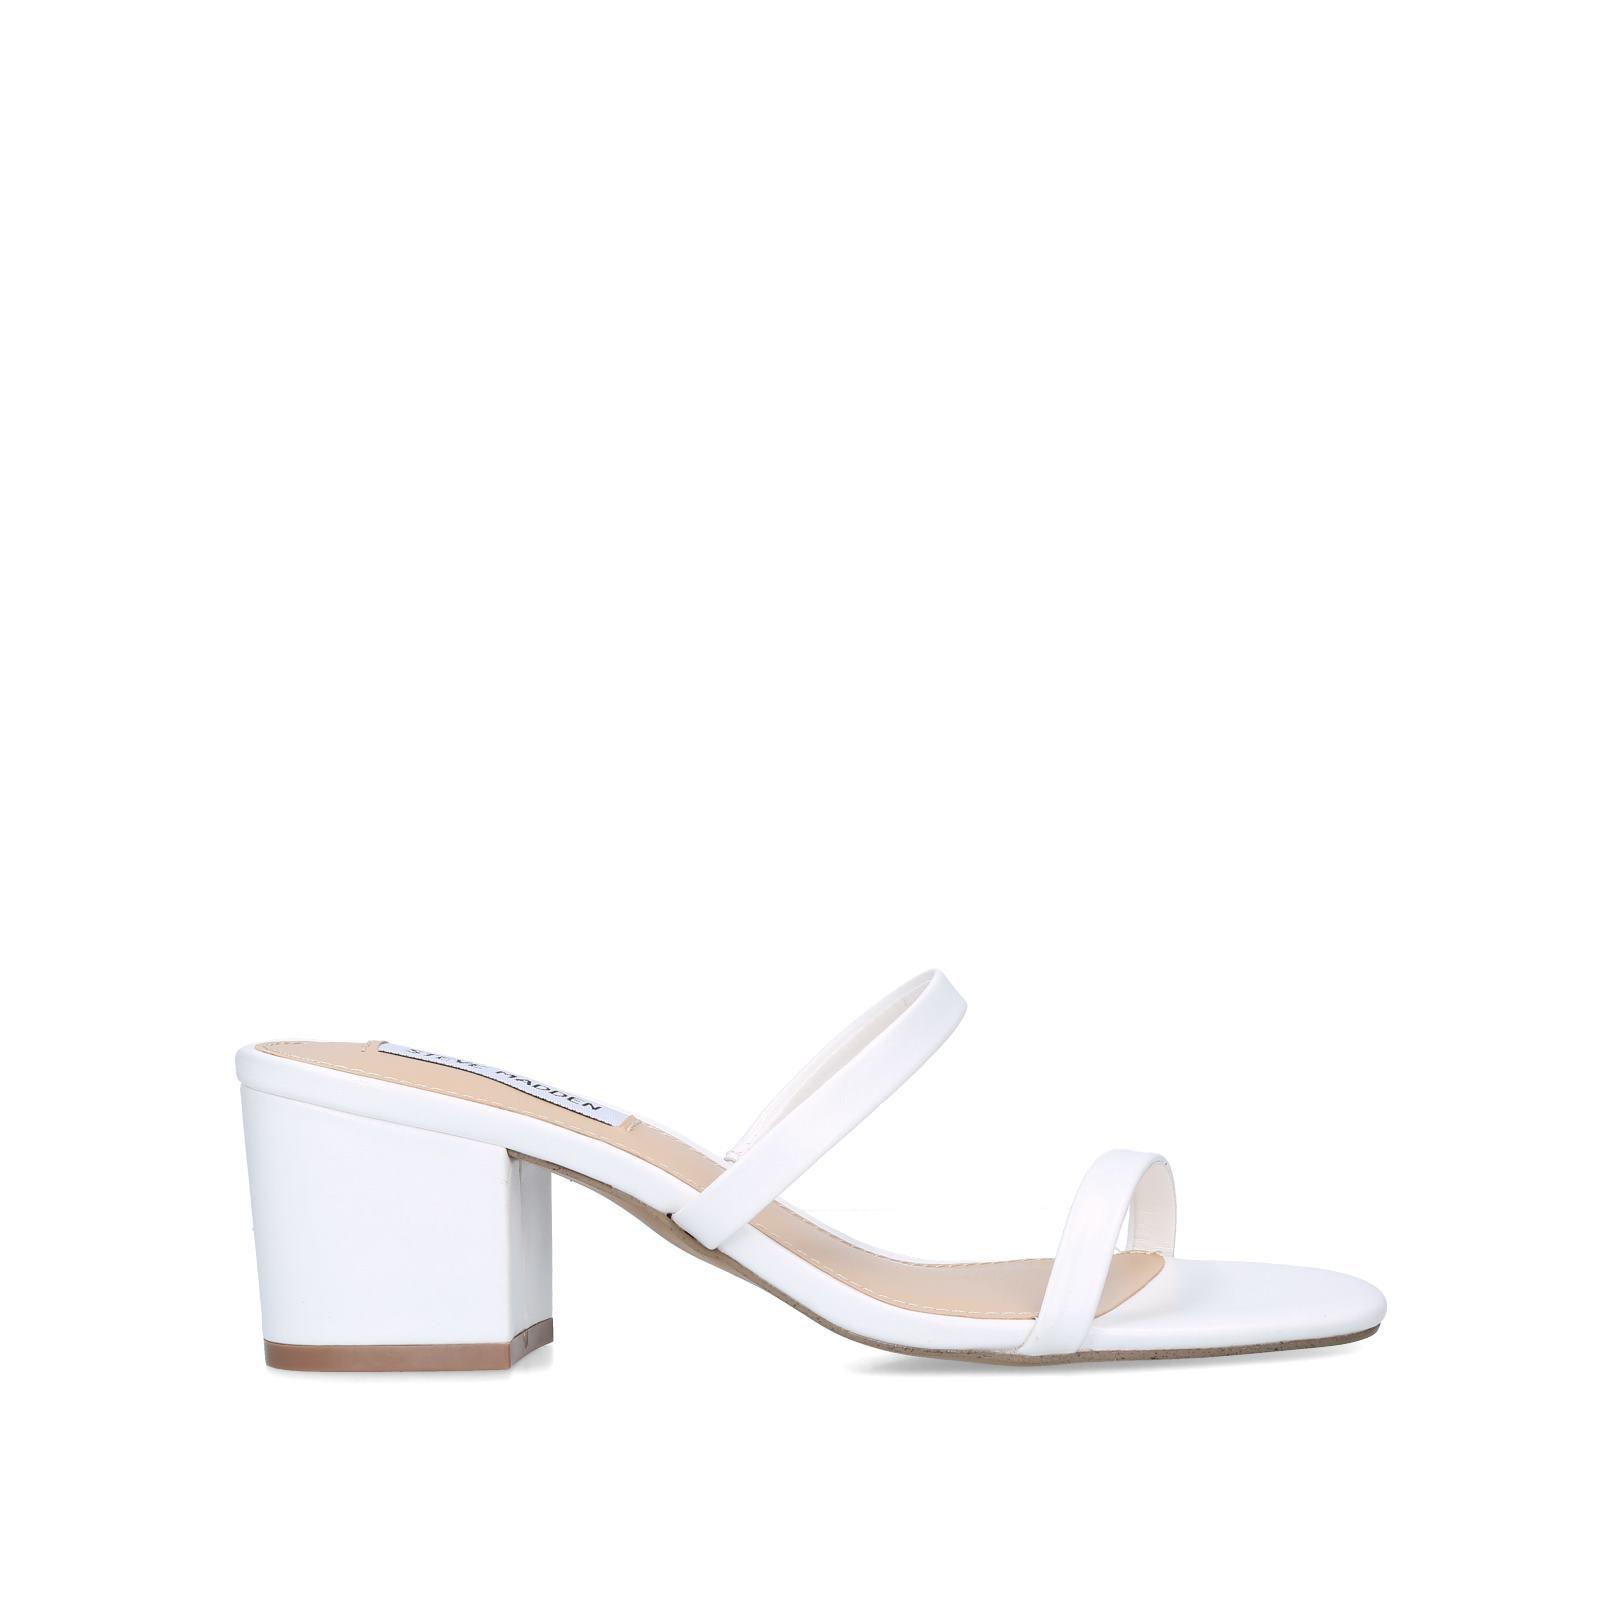 ISSY - STEVE MADDEN Occasion